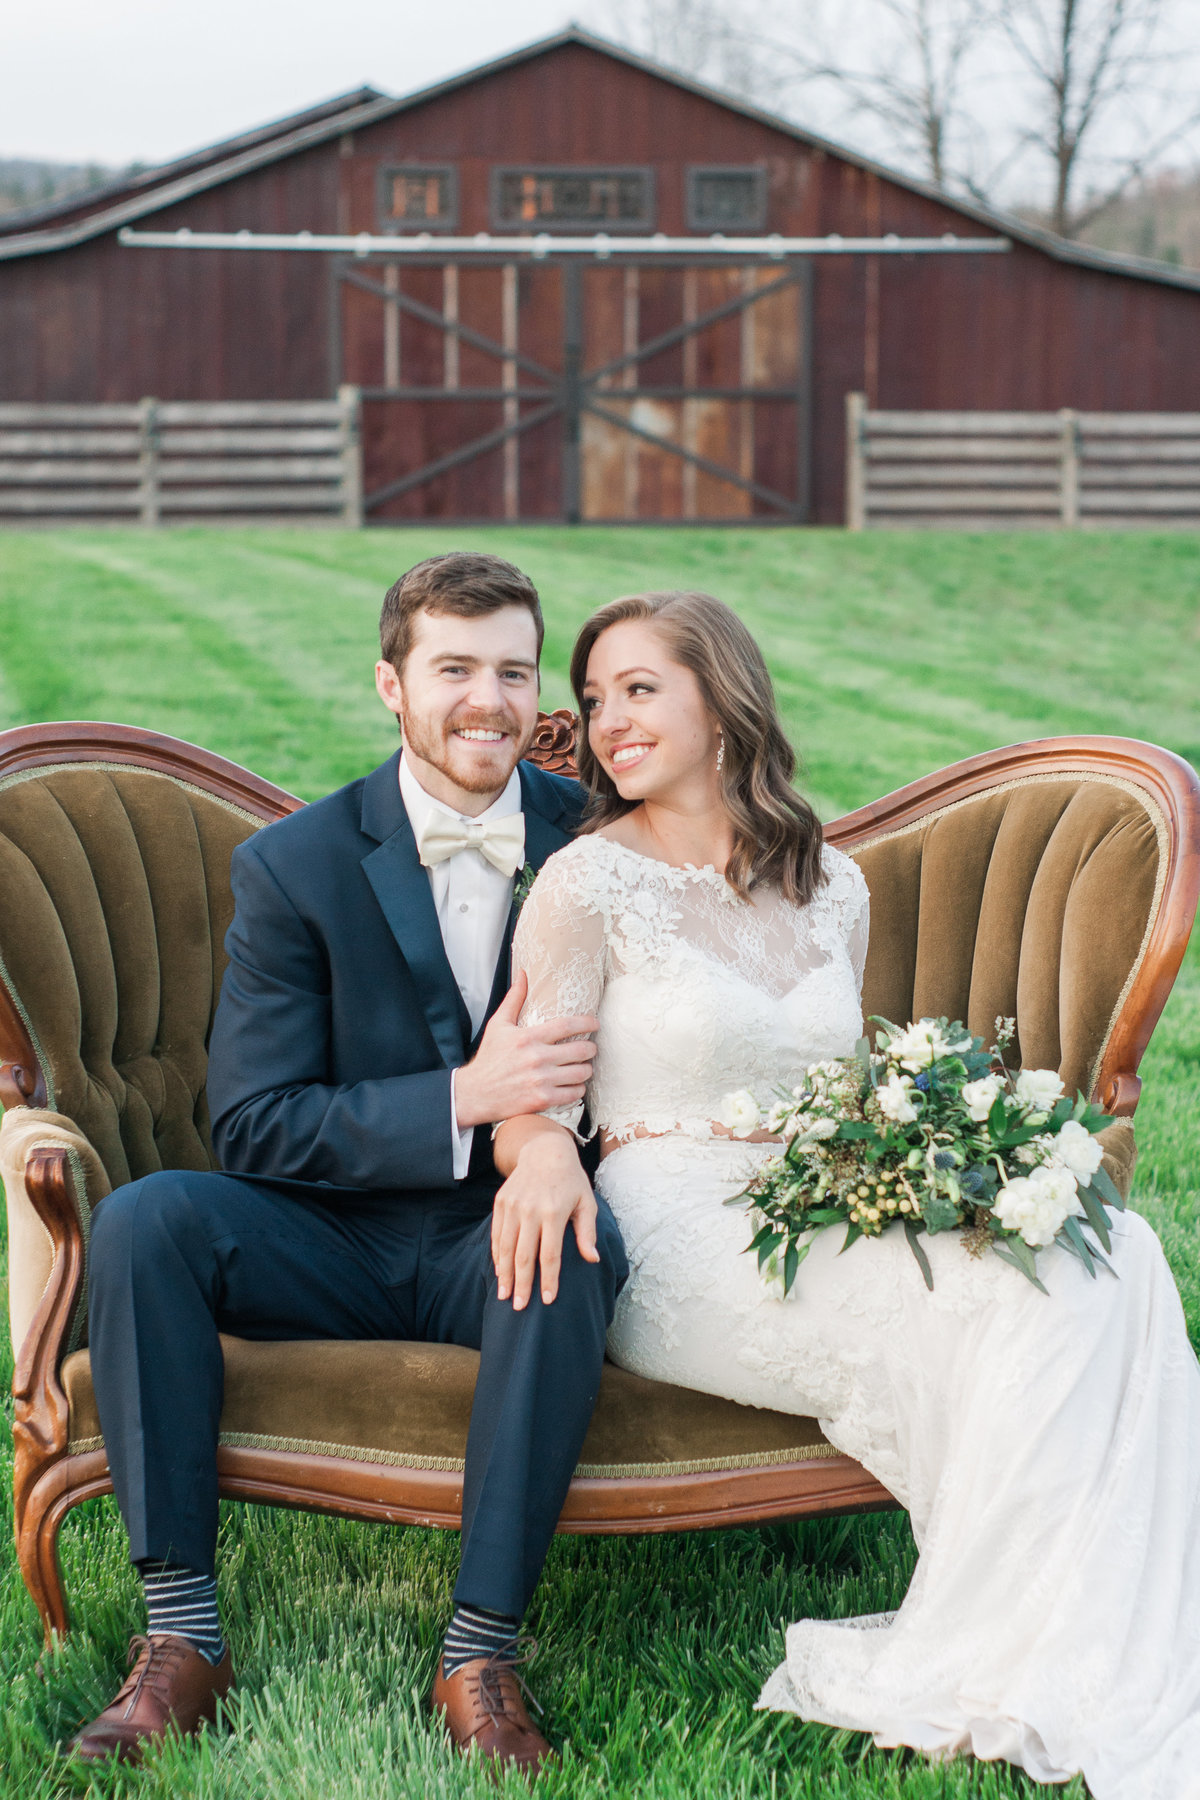 Barn wedding inspiration photographed at Fussell Farm by Boone Photographer Wayfaring Wanderer. Fussell Farm is a gorgeous venue in Millers Creek, NC.